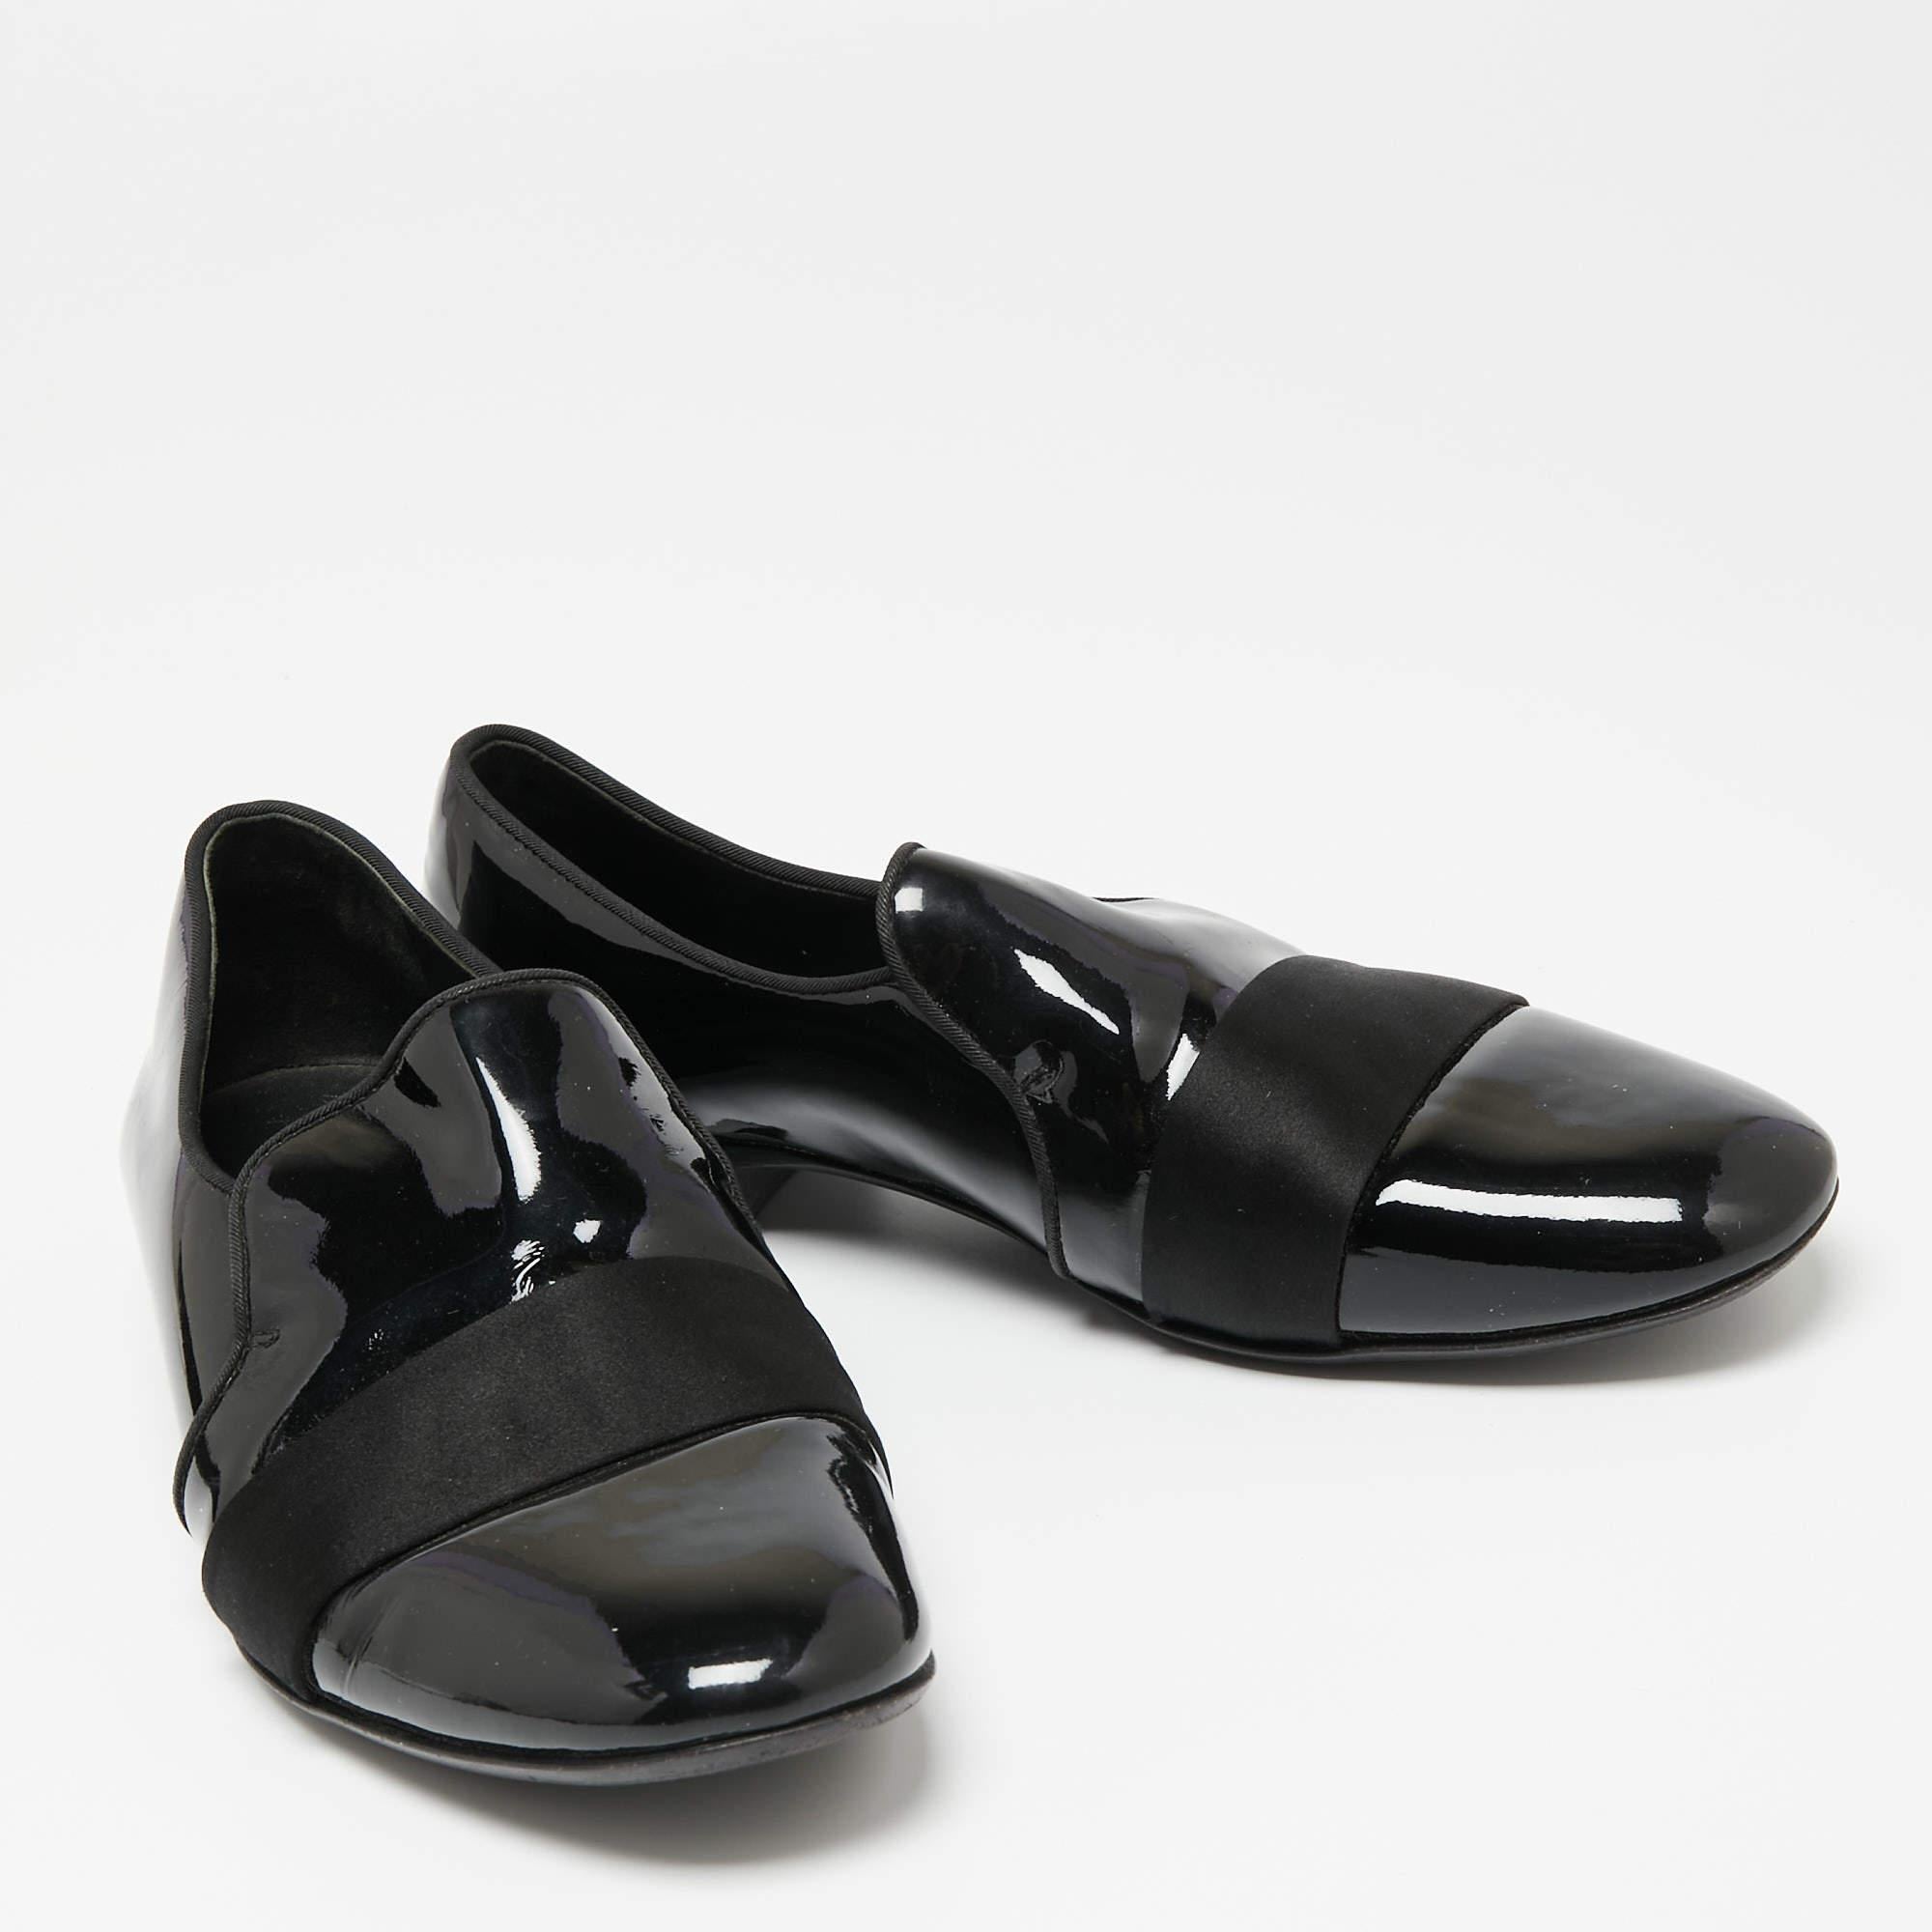 Giuseppe Zanotti Black Patent Leather and Satin Cap Toe Smoking Slippers Size 40 For Sale 1